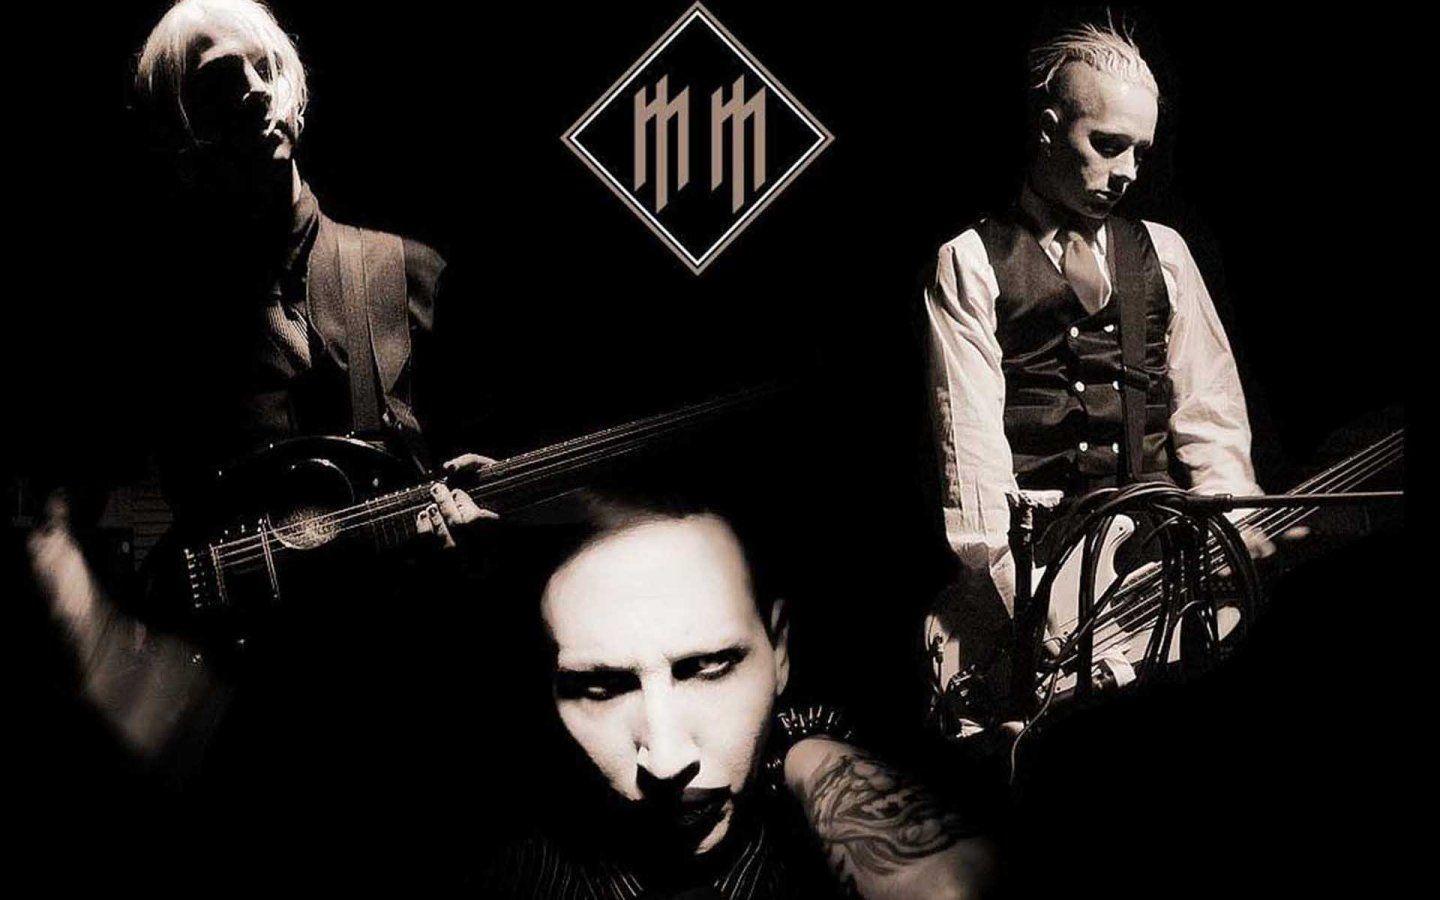 Marilyn Manson image Marilyn Manson wallpaper and background 1440